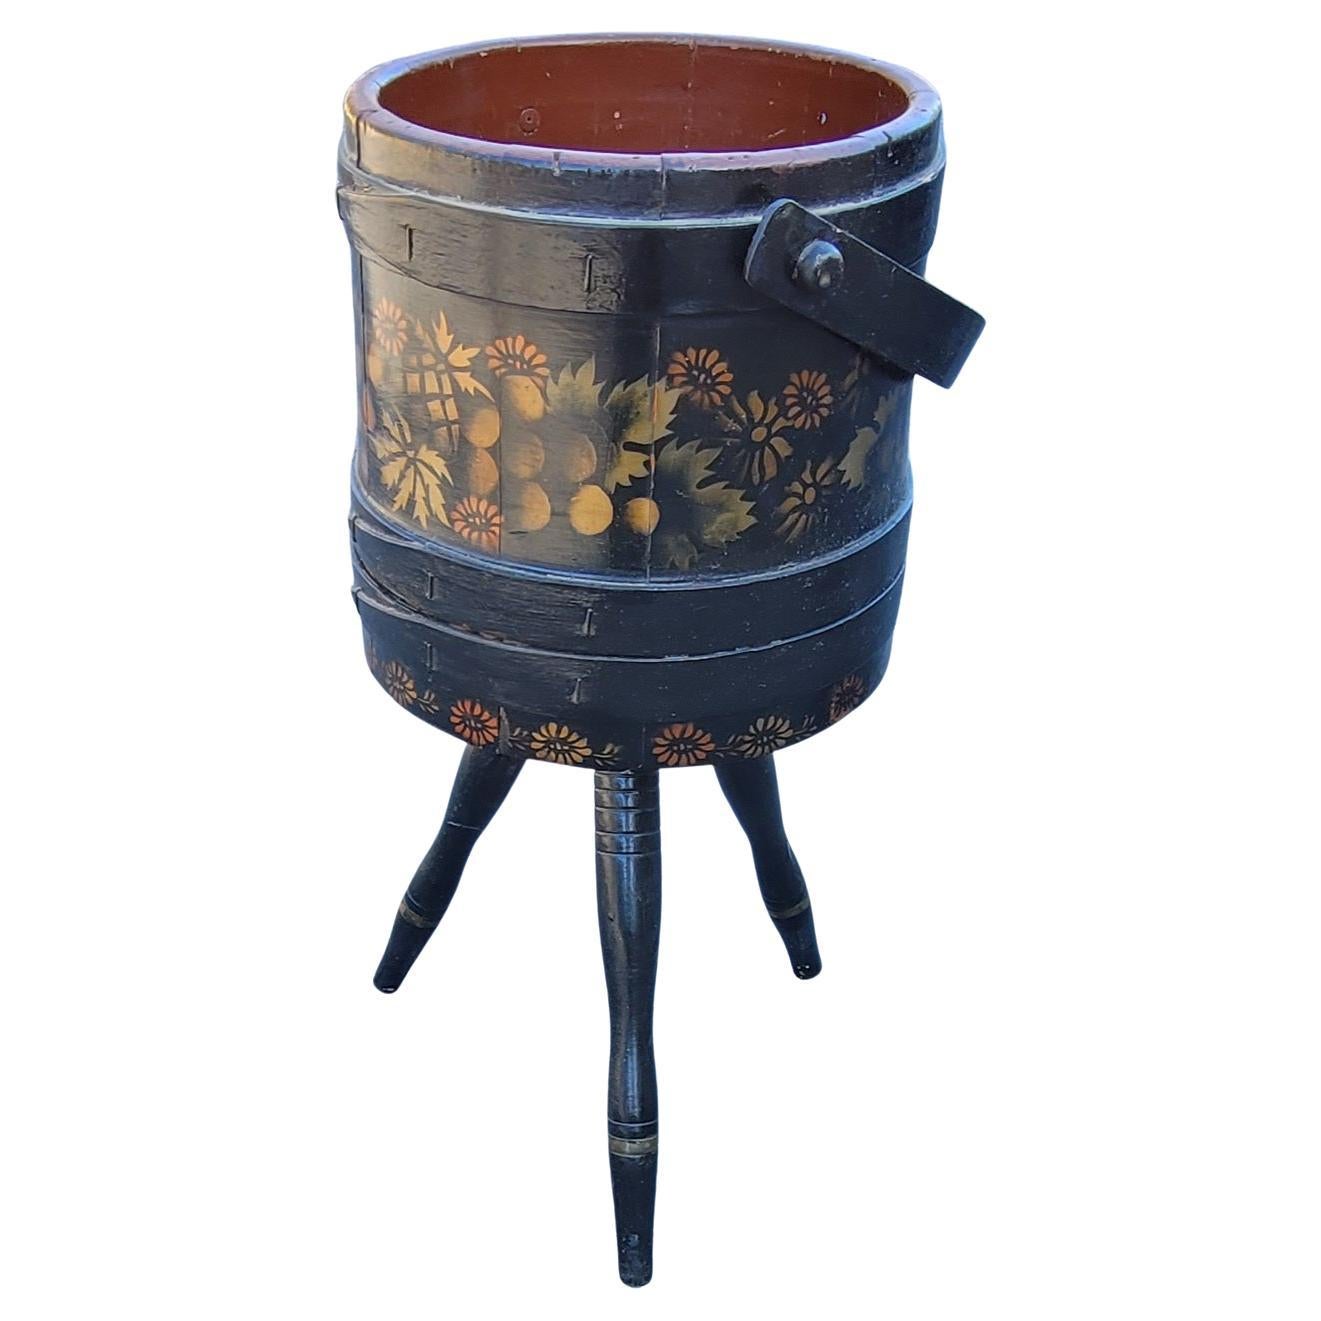 A 1920s hand-crafted, hand painted and Decorated Tripod Firkin or Sewing Bucket with handle.
Newer paint job with flowers.
 